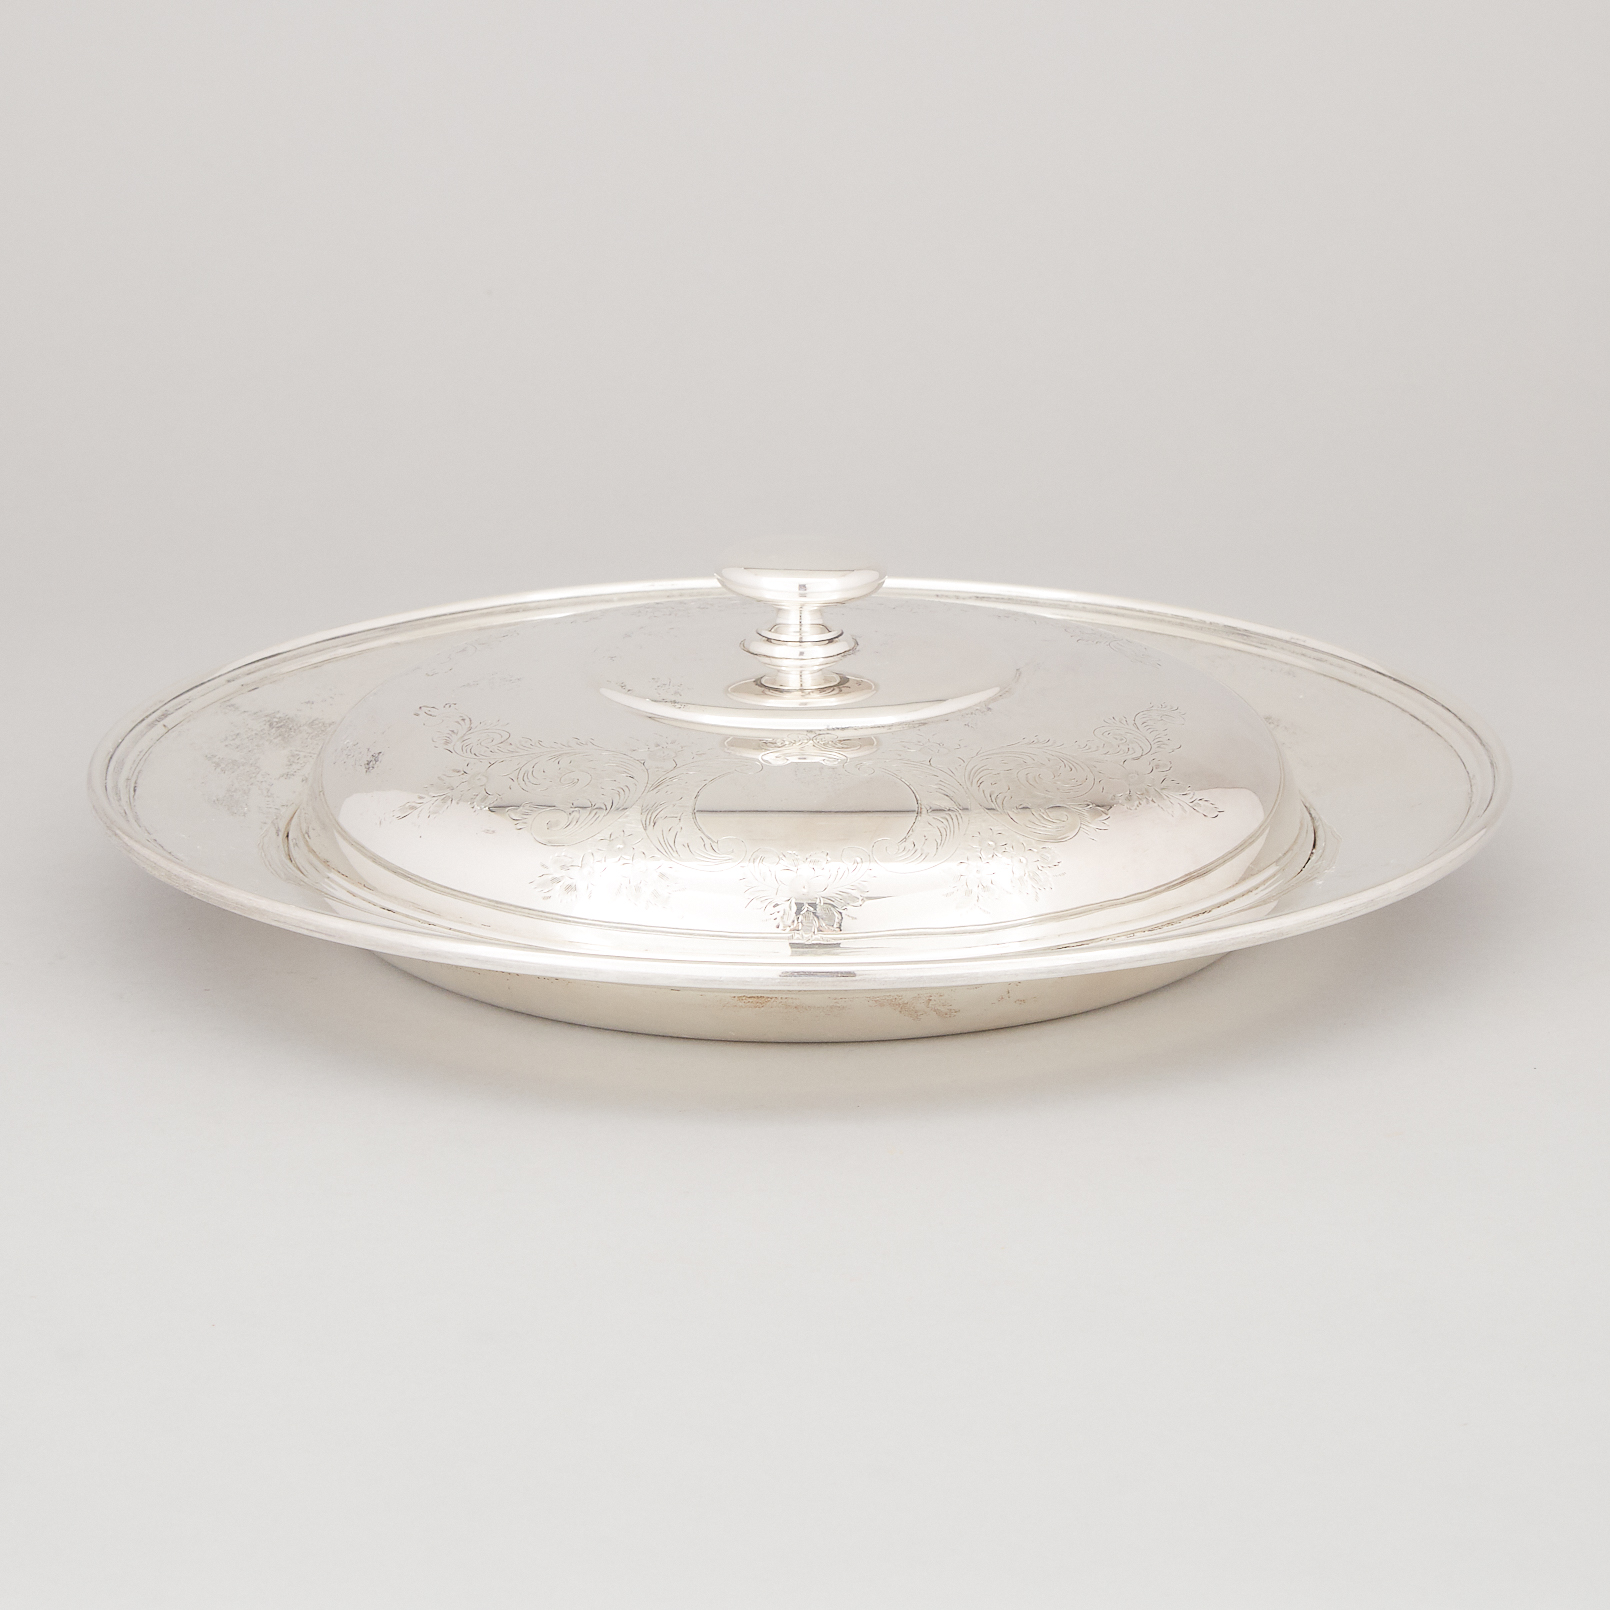 Canadian Silver Covered Serving Dish, Henry Birks & Sons, Montreal, Que., 20th century